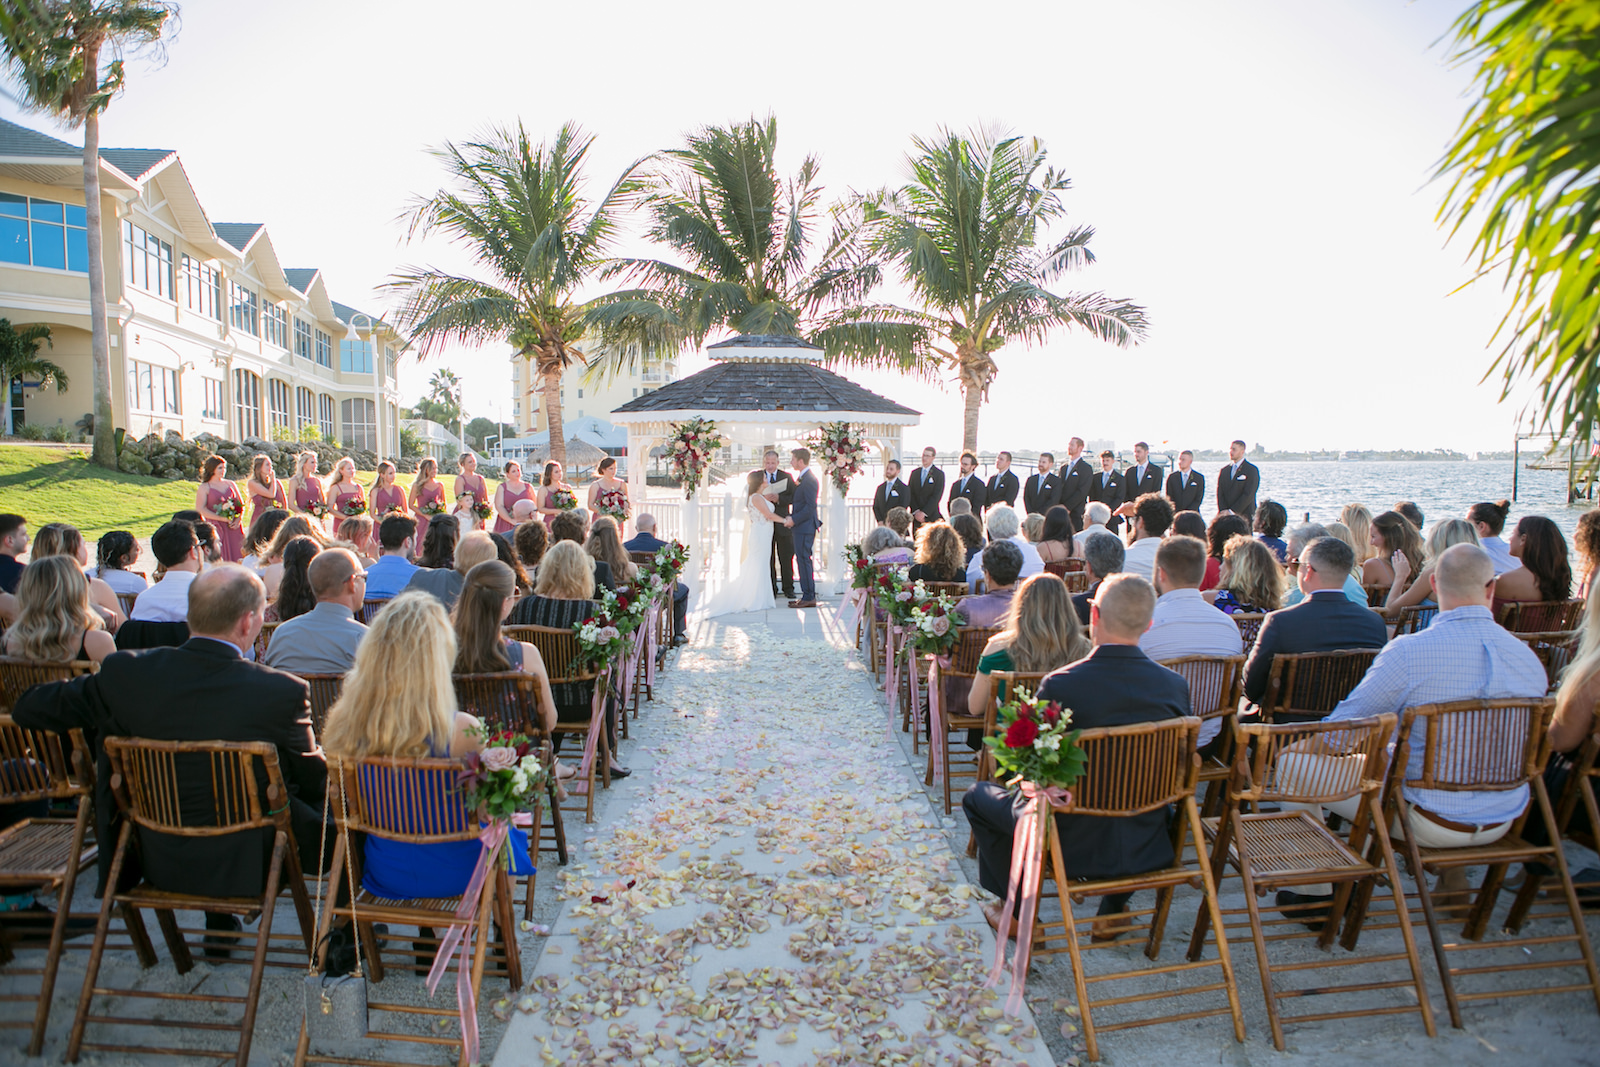 Dusty Rose and Mauve Waterfront Wedding Ceremony Decor, Bride and Groom Exchanging Wedding Vows, Wooden Bamboo Chairs, Tropical Floral Arrangements, Gazebo | Tampa Bay Wedding Photographer Carrie Wildes Photography | St. Pete Wedding Venue Isla Del Sol Yacht and Country Club | Wedding Chair Rentals A Chair Affair | Wedding Planner Perfecting the Plan